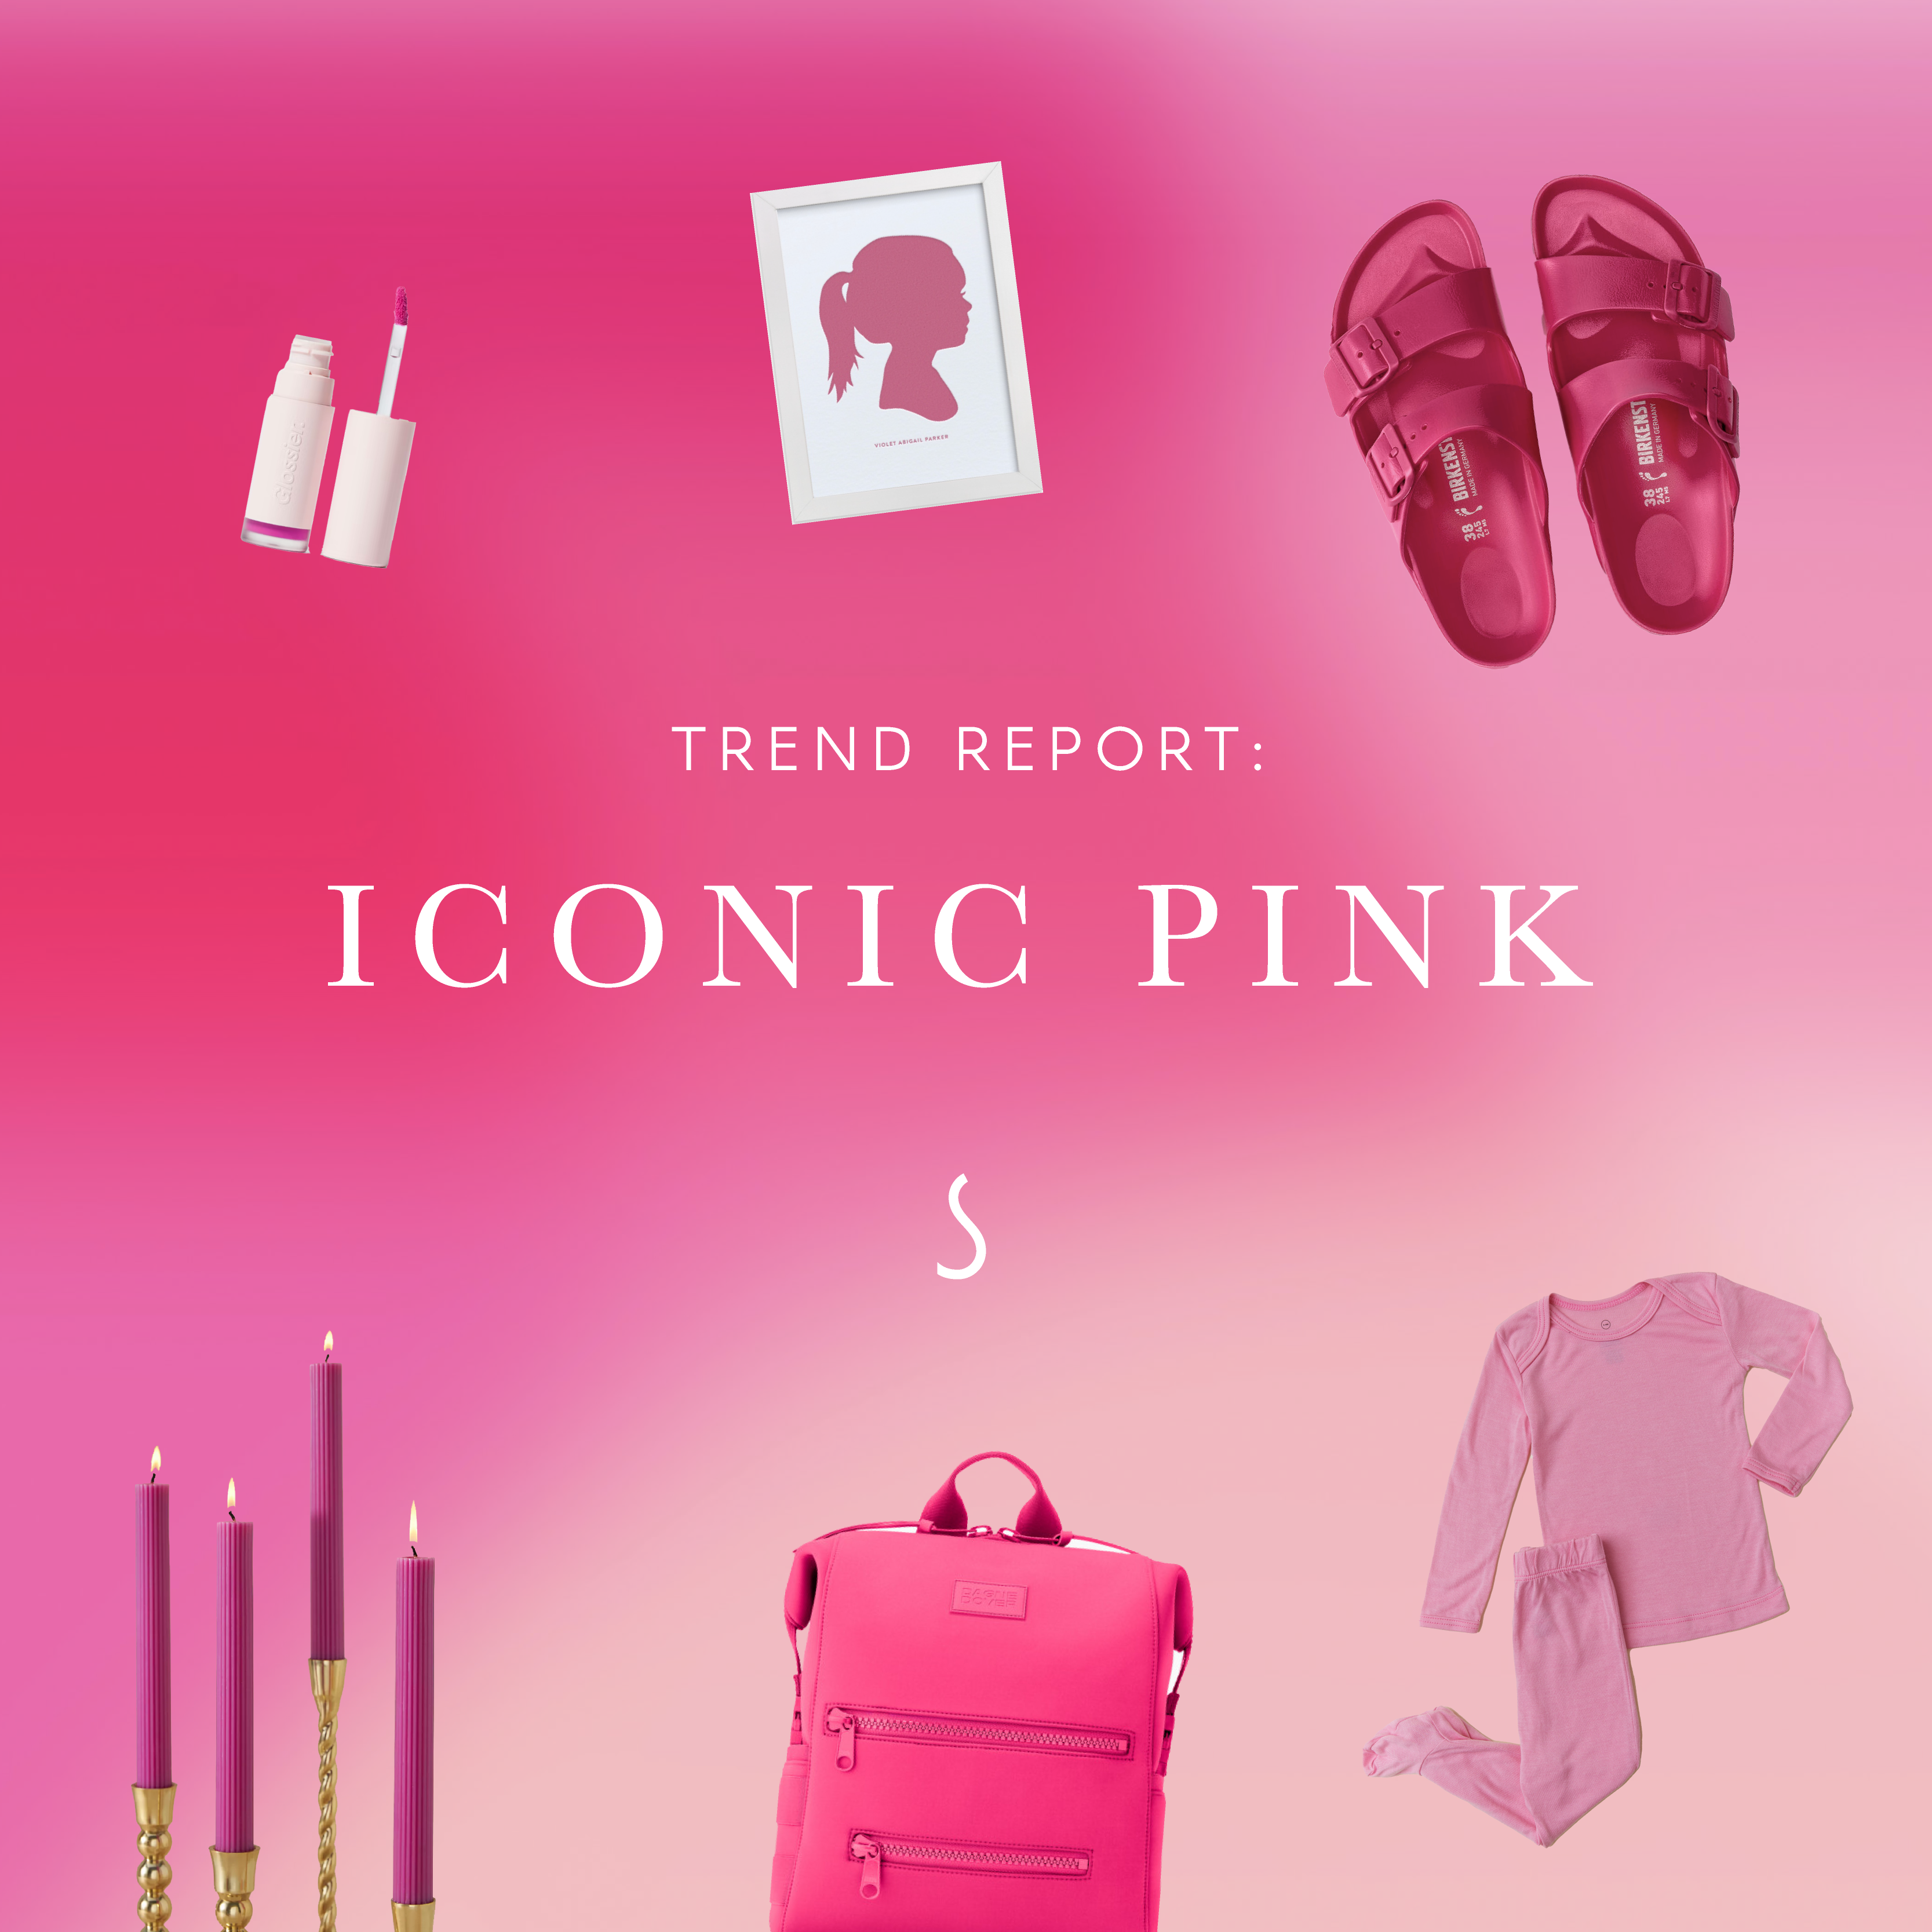 Trend Report: Iconic Pink